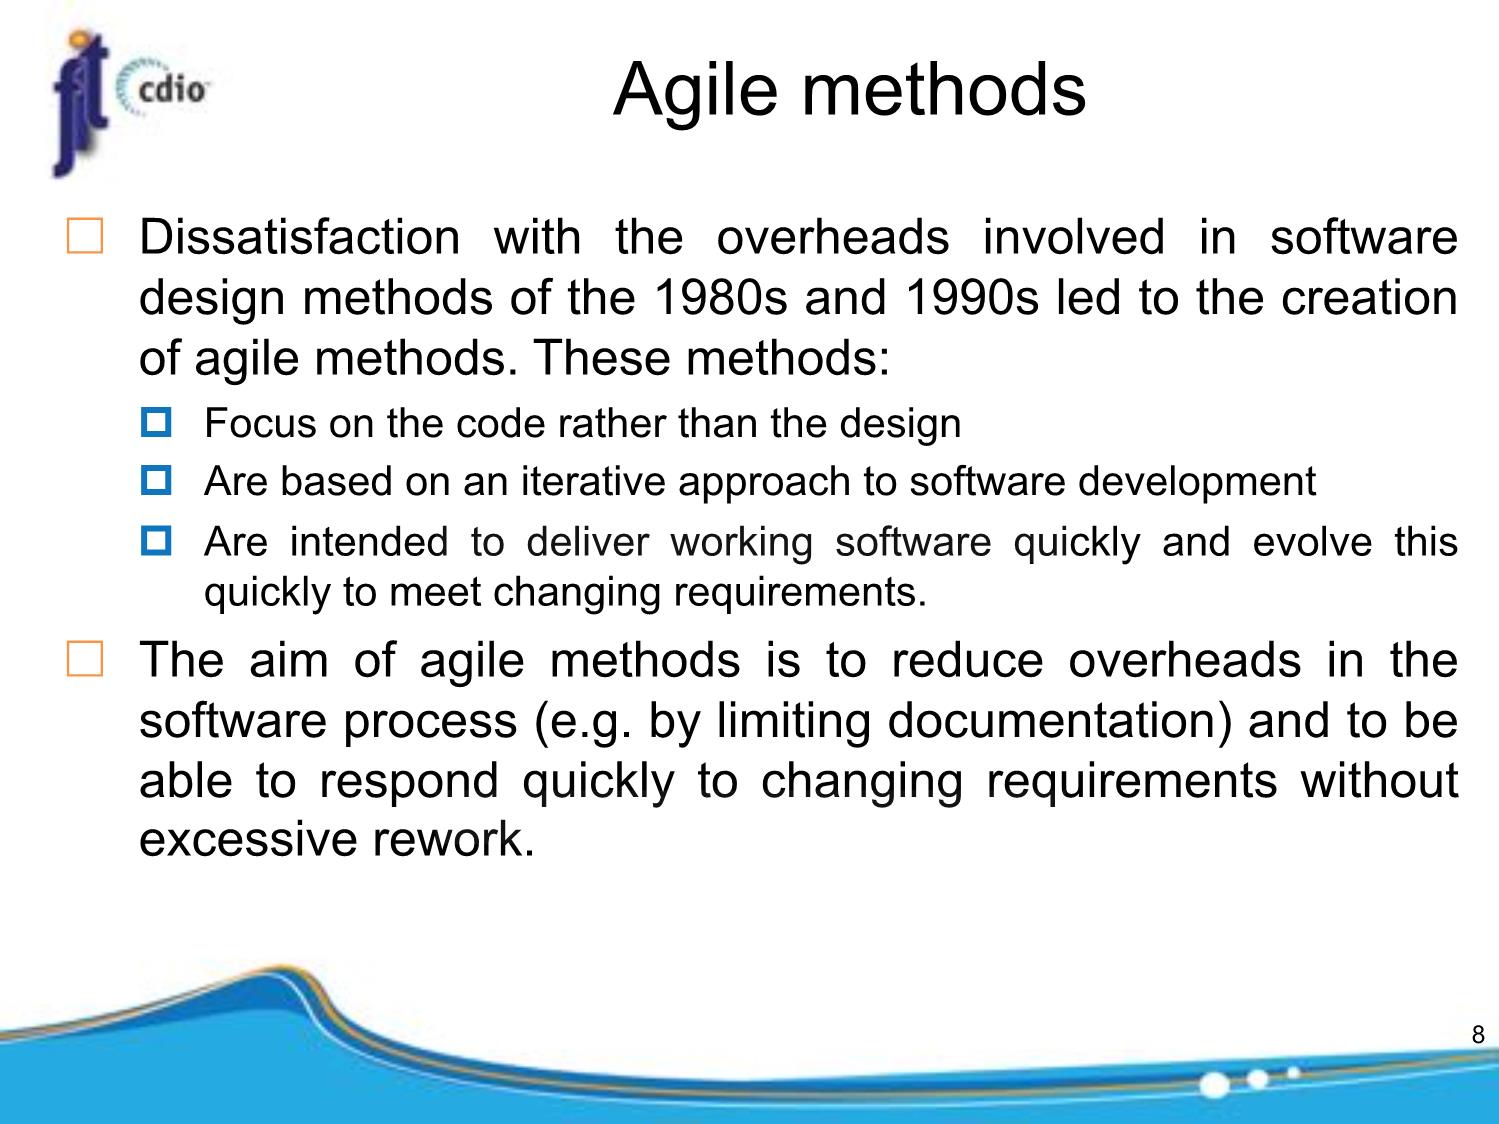 Bài giảng Introduction to Software Engineering - Week 10: Agile software development - Nguyễn Thị Minh Tuyền trang 8